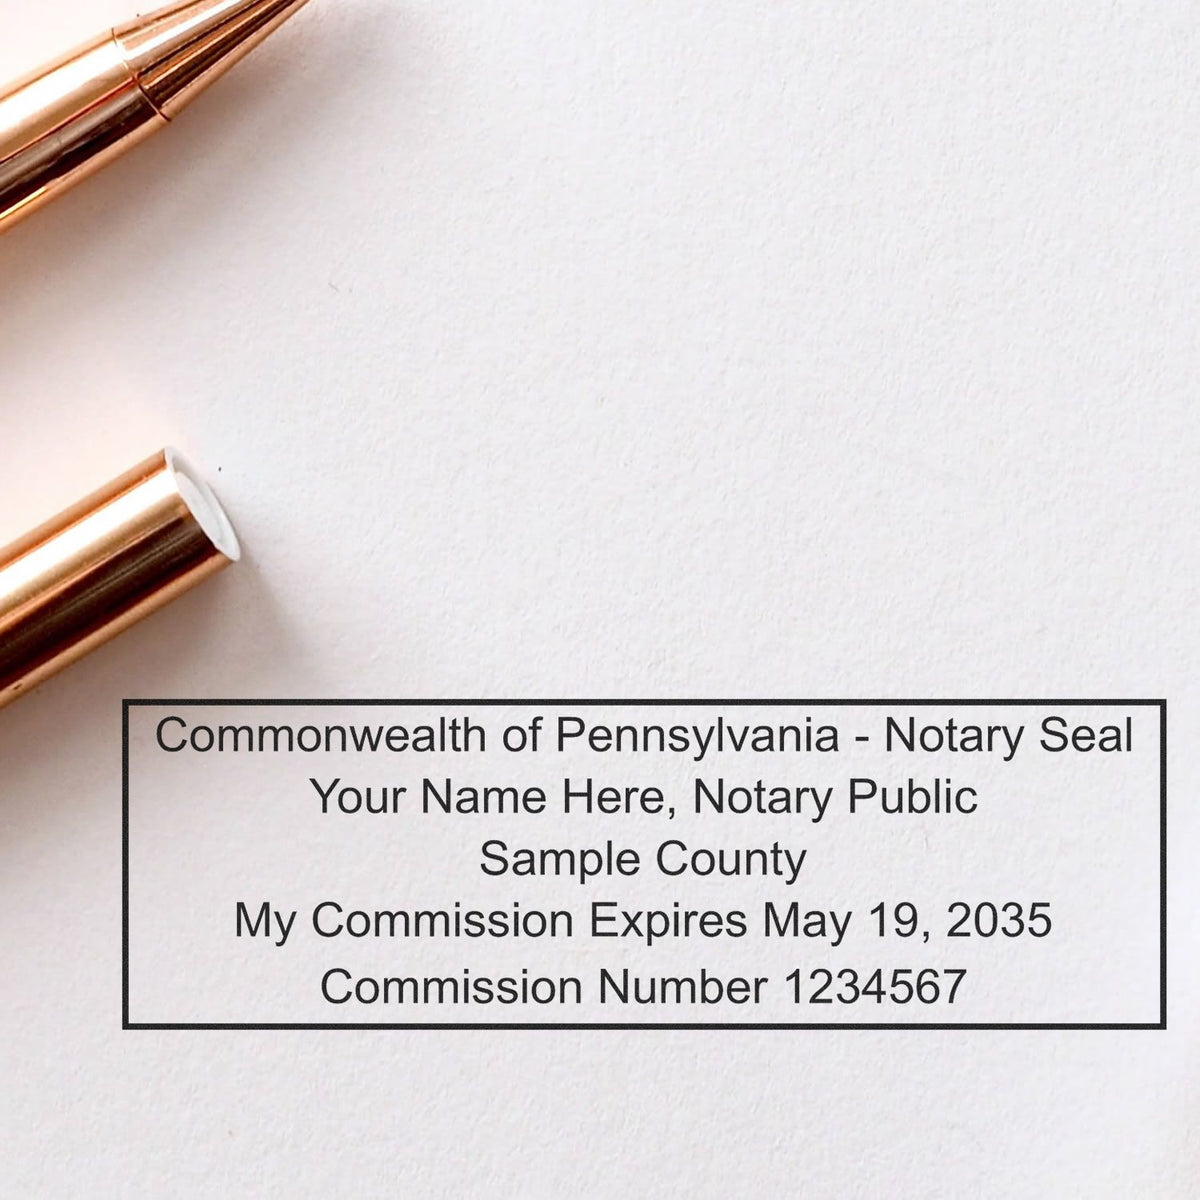 The Slim Pre-Inked Rectangular Notary Stamp for Pennsylvania stamp impression comes to life with a crisp, detailed photo on paper - showcasing true professional quality.